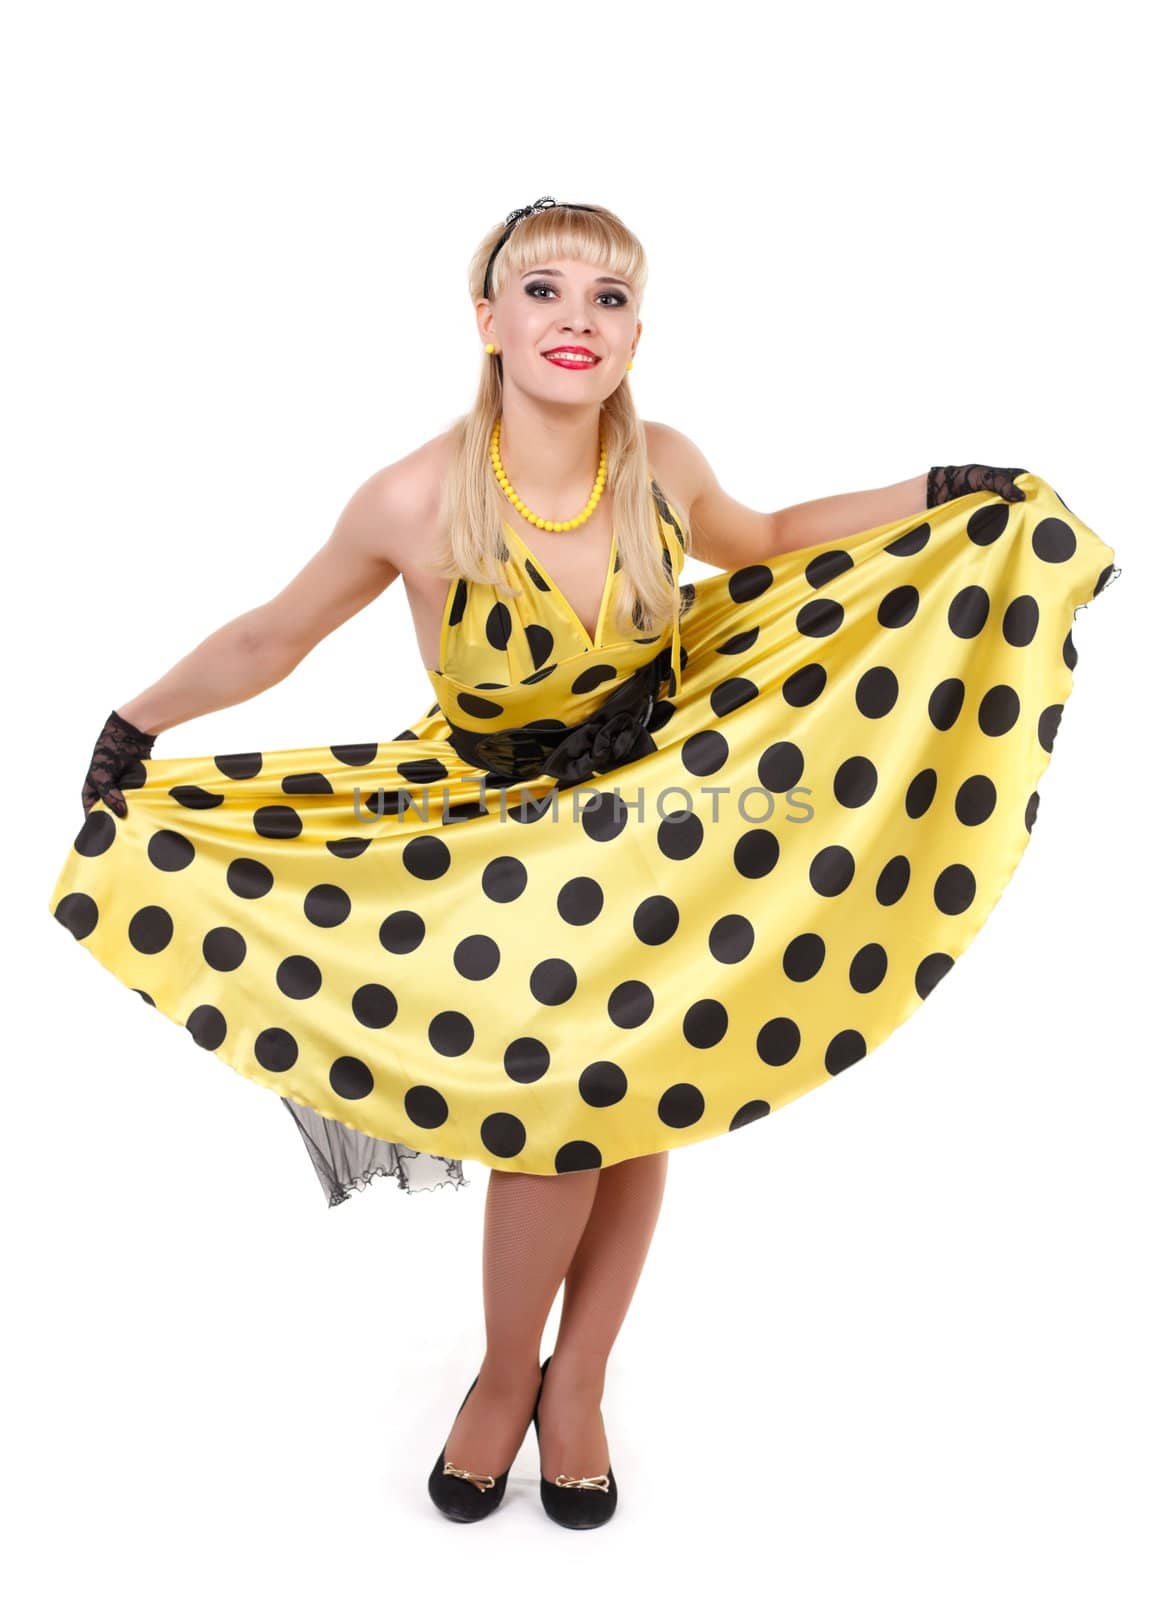 Young dancer woman in yellow dress.